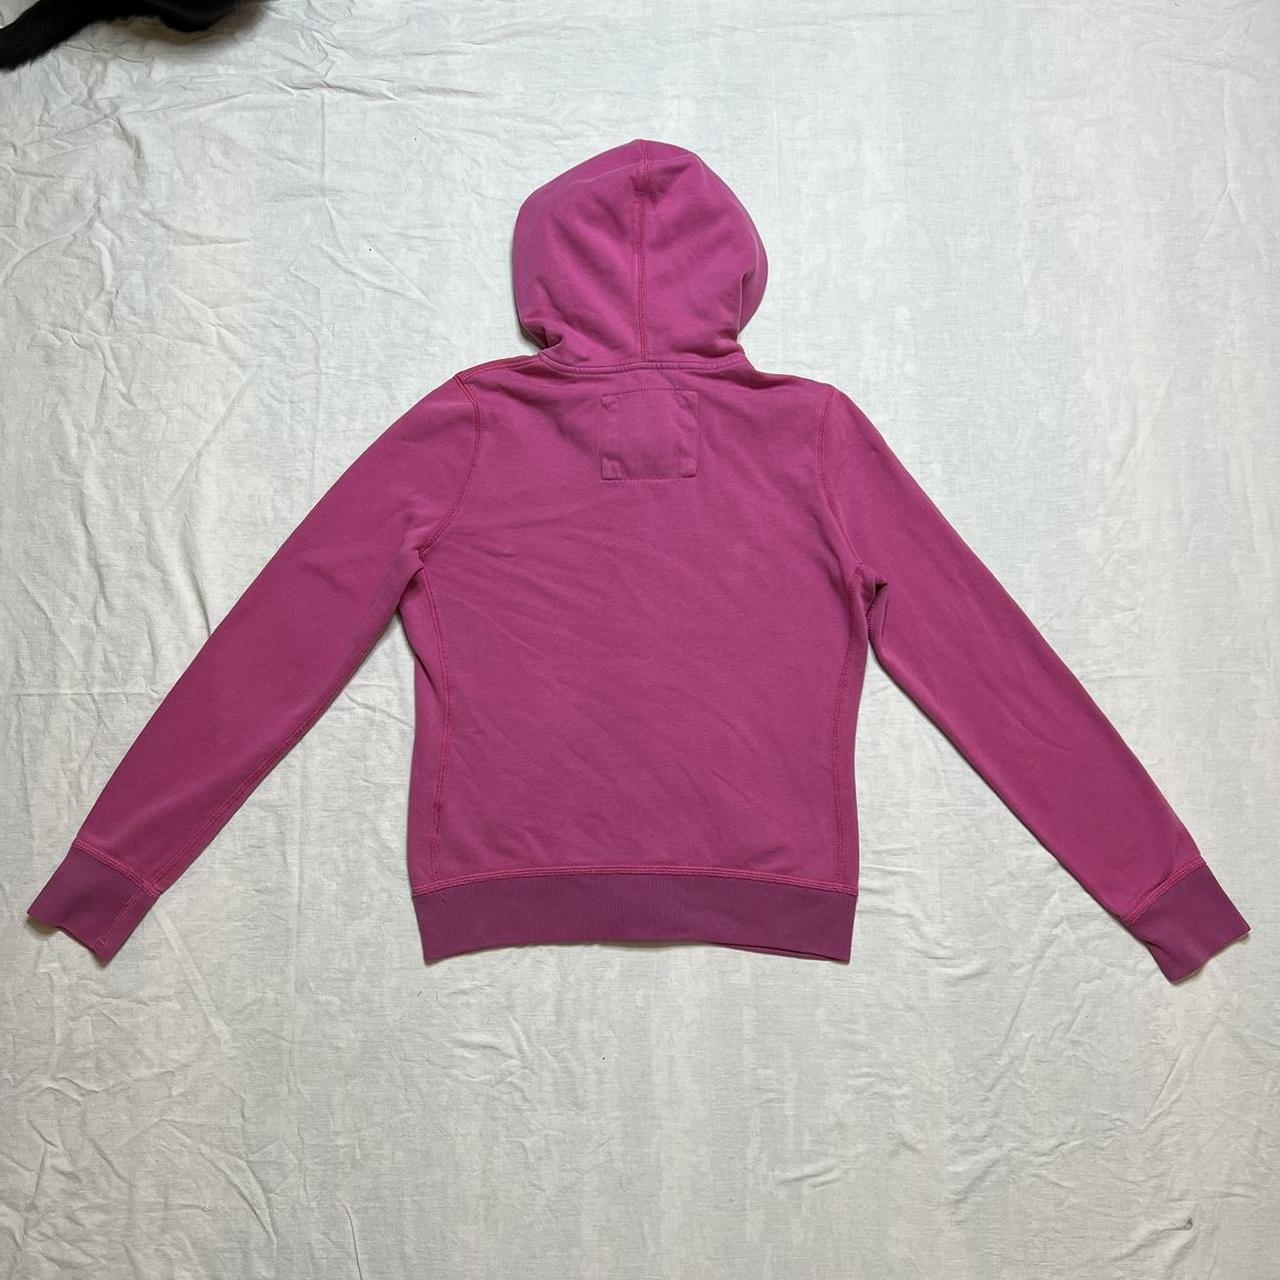 2010s pink abercrombie and fitch zip up hoodie... - Depop